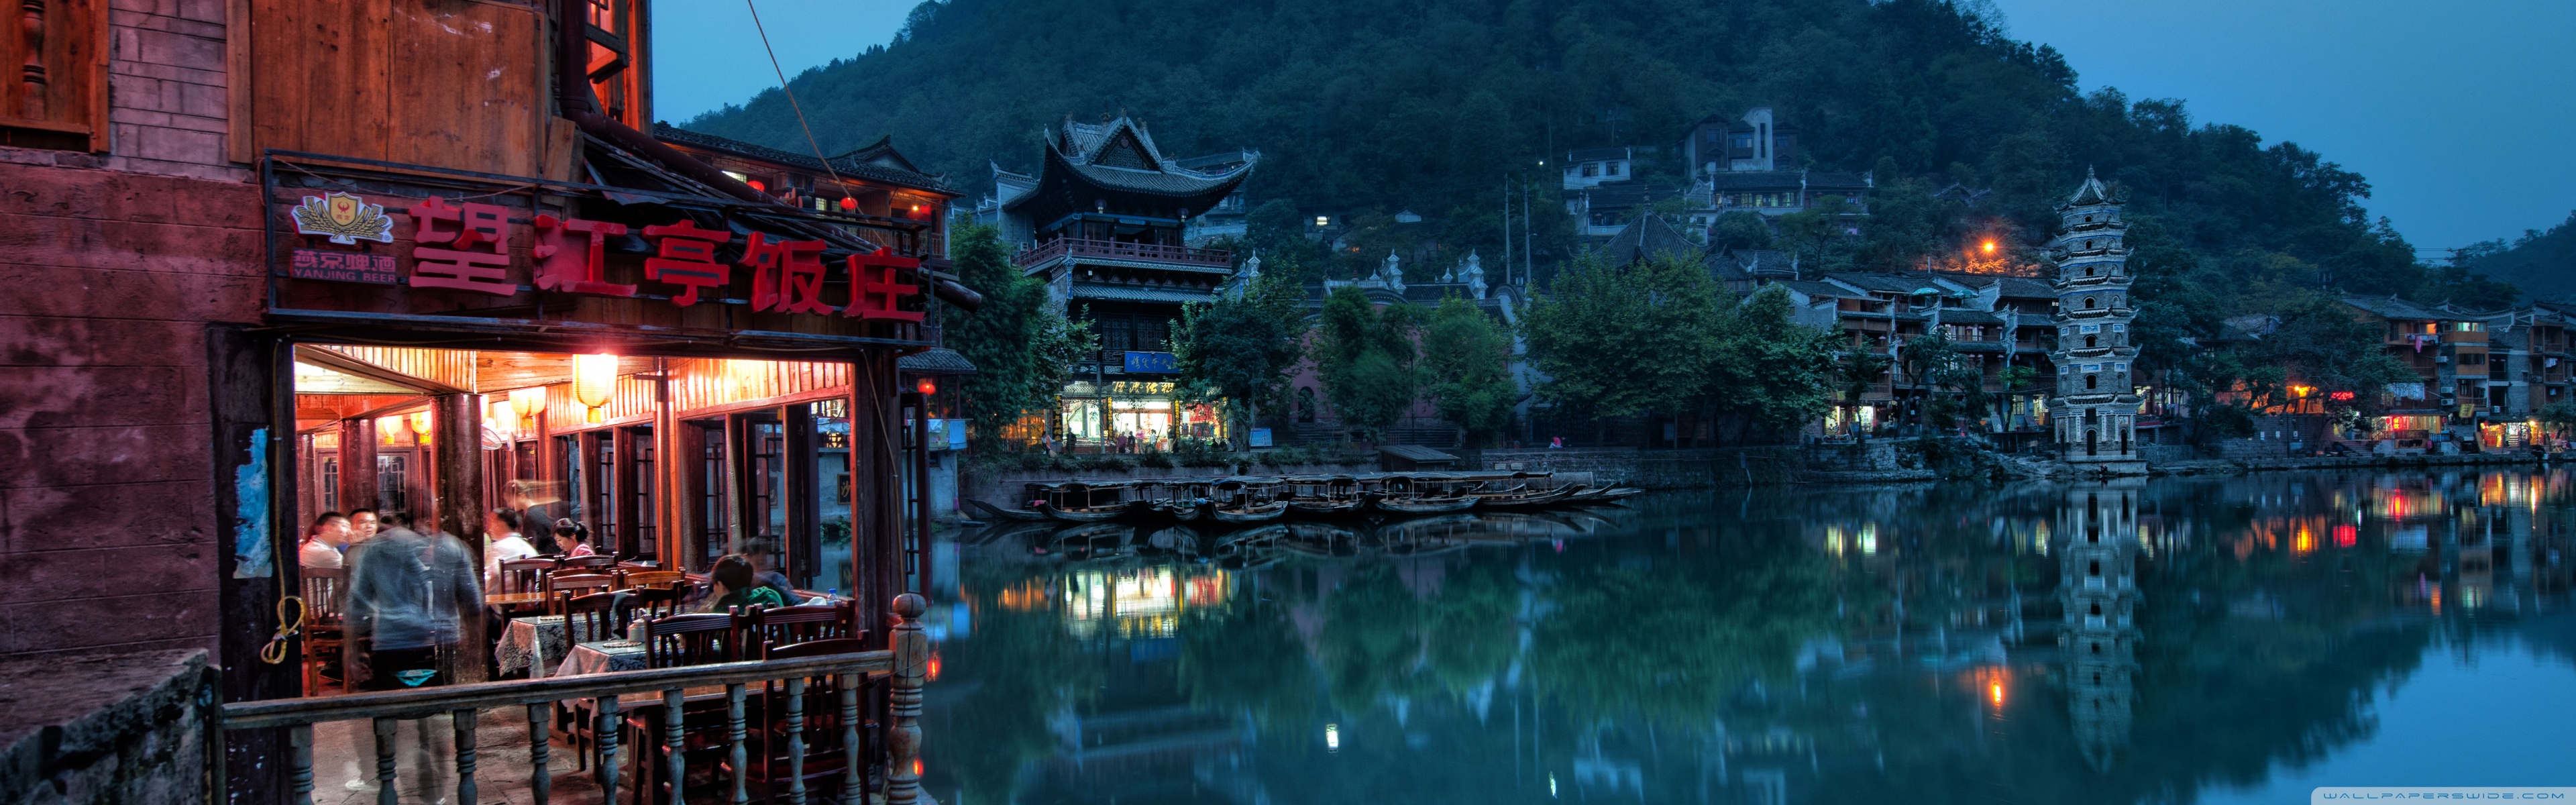 dual monitor wallpaper,nature,chinese architecture,water,town,reflection